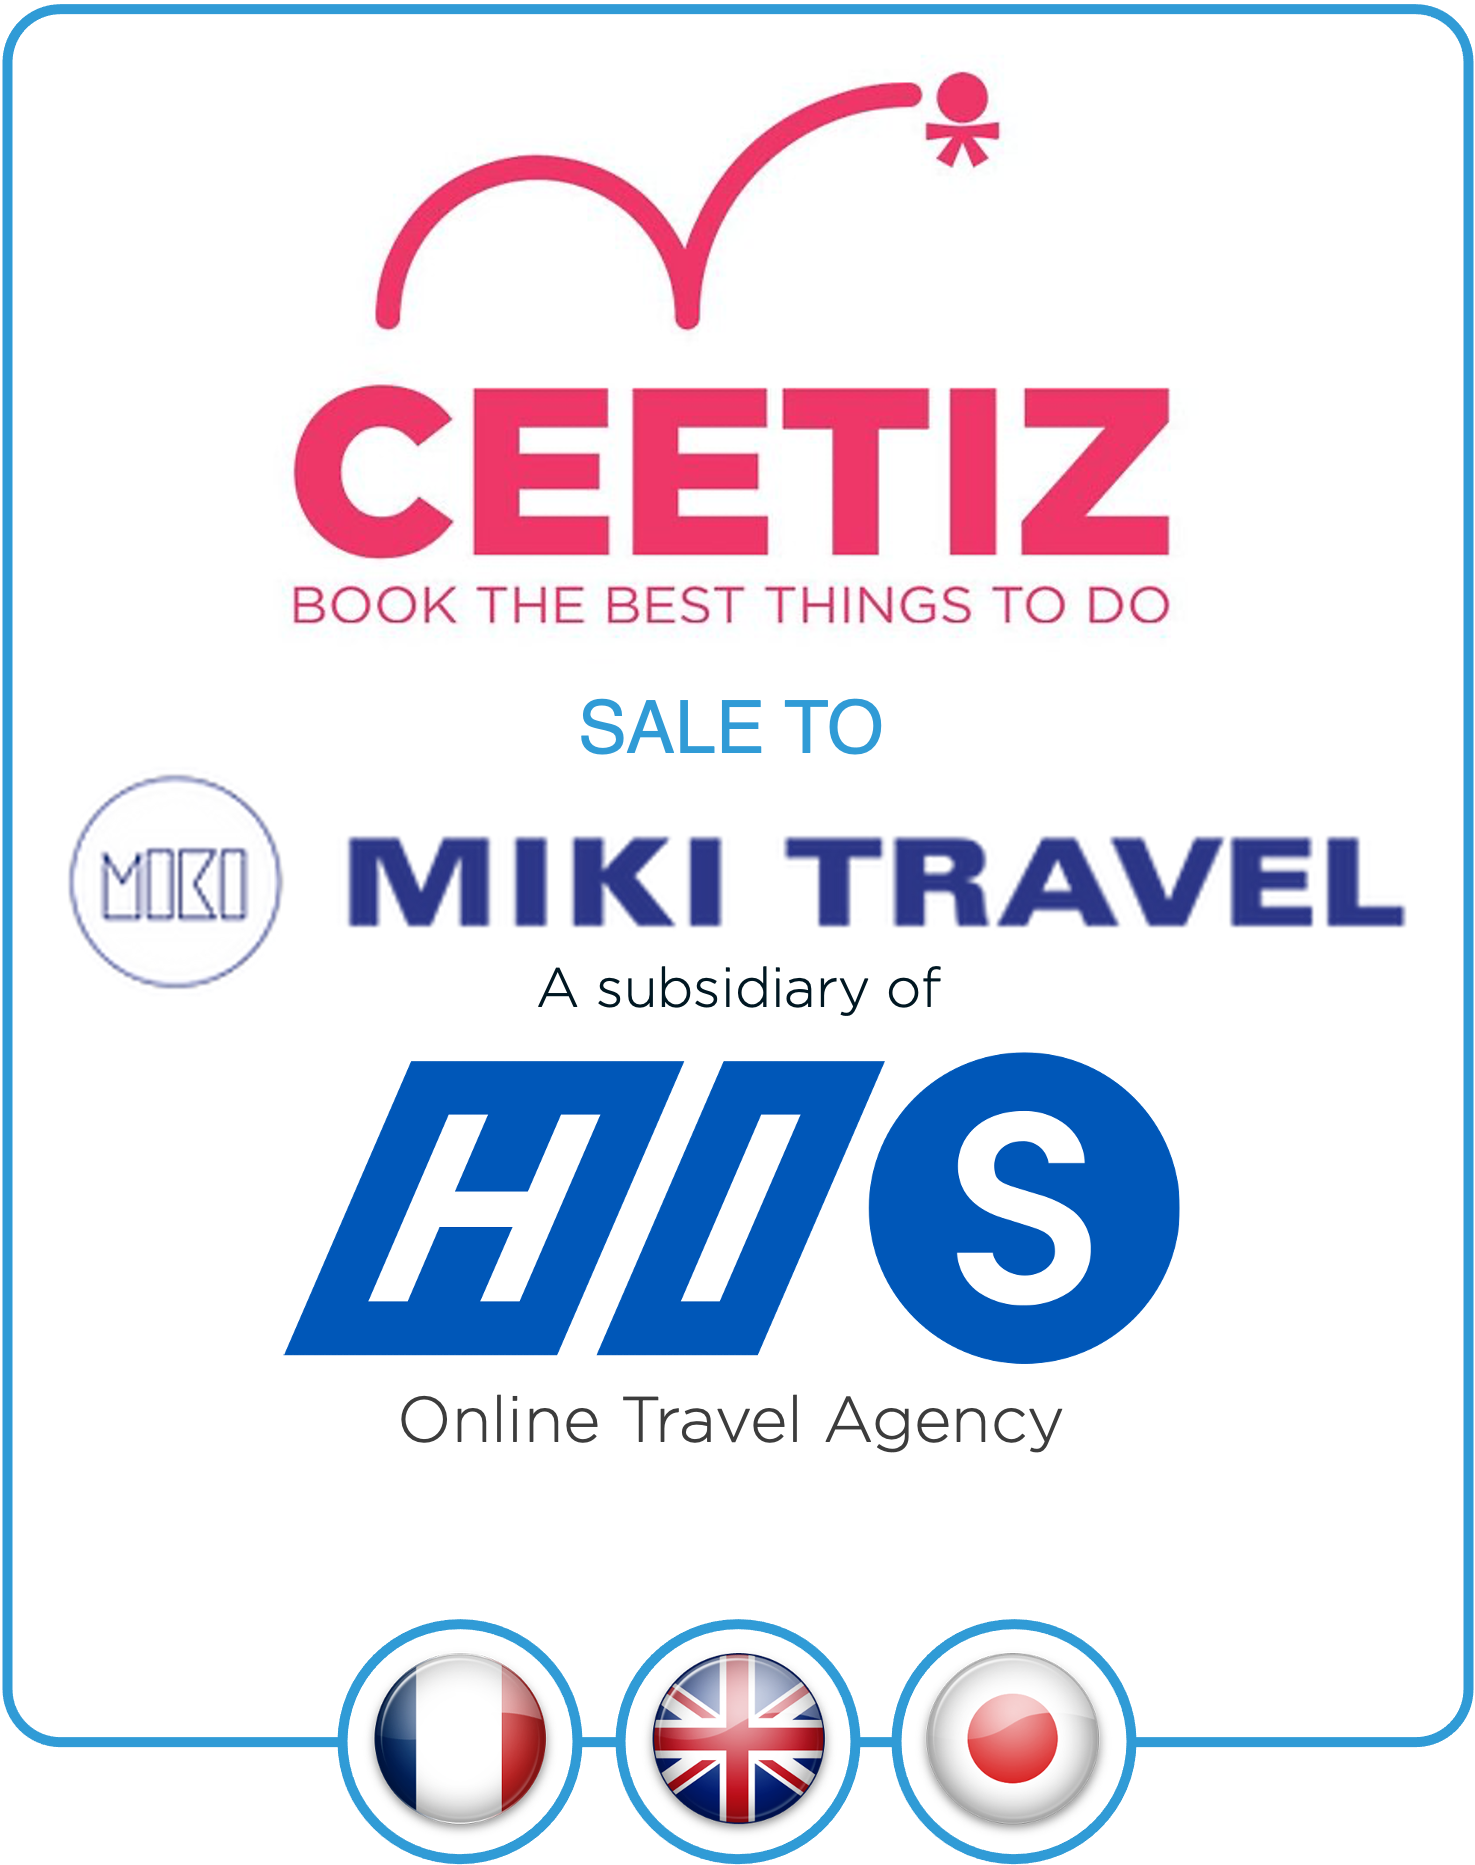 Drake Star Partners Advises Ceetiz On Its Acquisition By Miki Travel A Subsidiary Of His (Tyo: 9603)